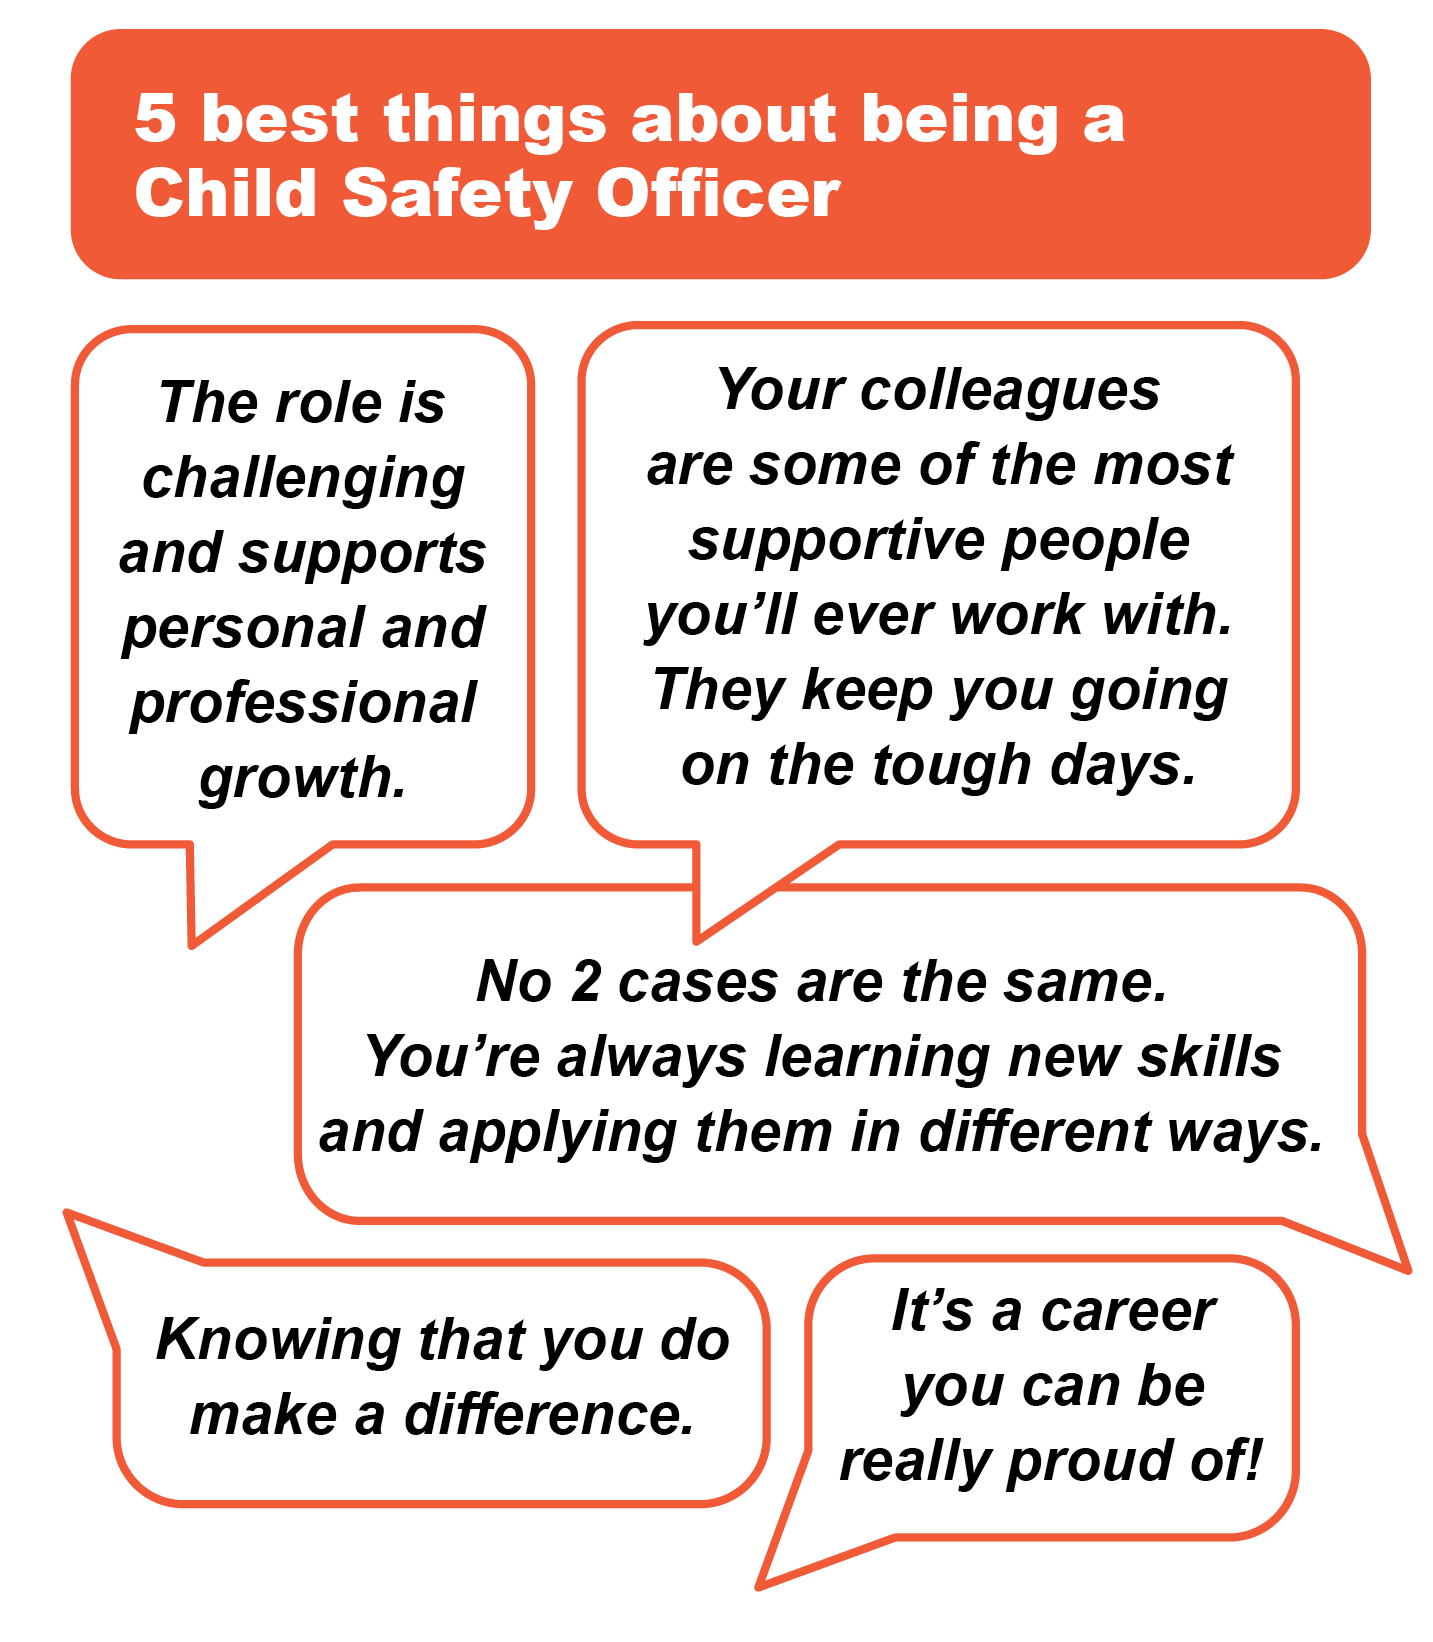 5 best things about being a Child Safety Officer: 1) The role is challenging and supports personal and professional growth. 2) Your colleagues are some of the most supportive people you'll ever work with. They keep you going on the tough days. 3) No 2 cases are the same. You're always learning new skills and applying them in different ways. 4) Knowing that you do make a difference. 5) It's a career you can be really proud of!